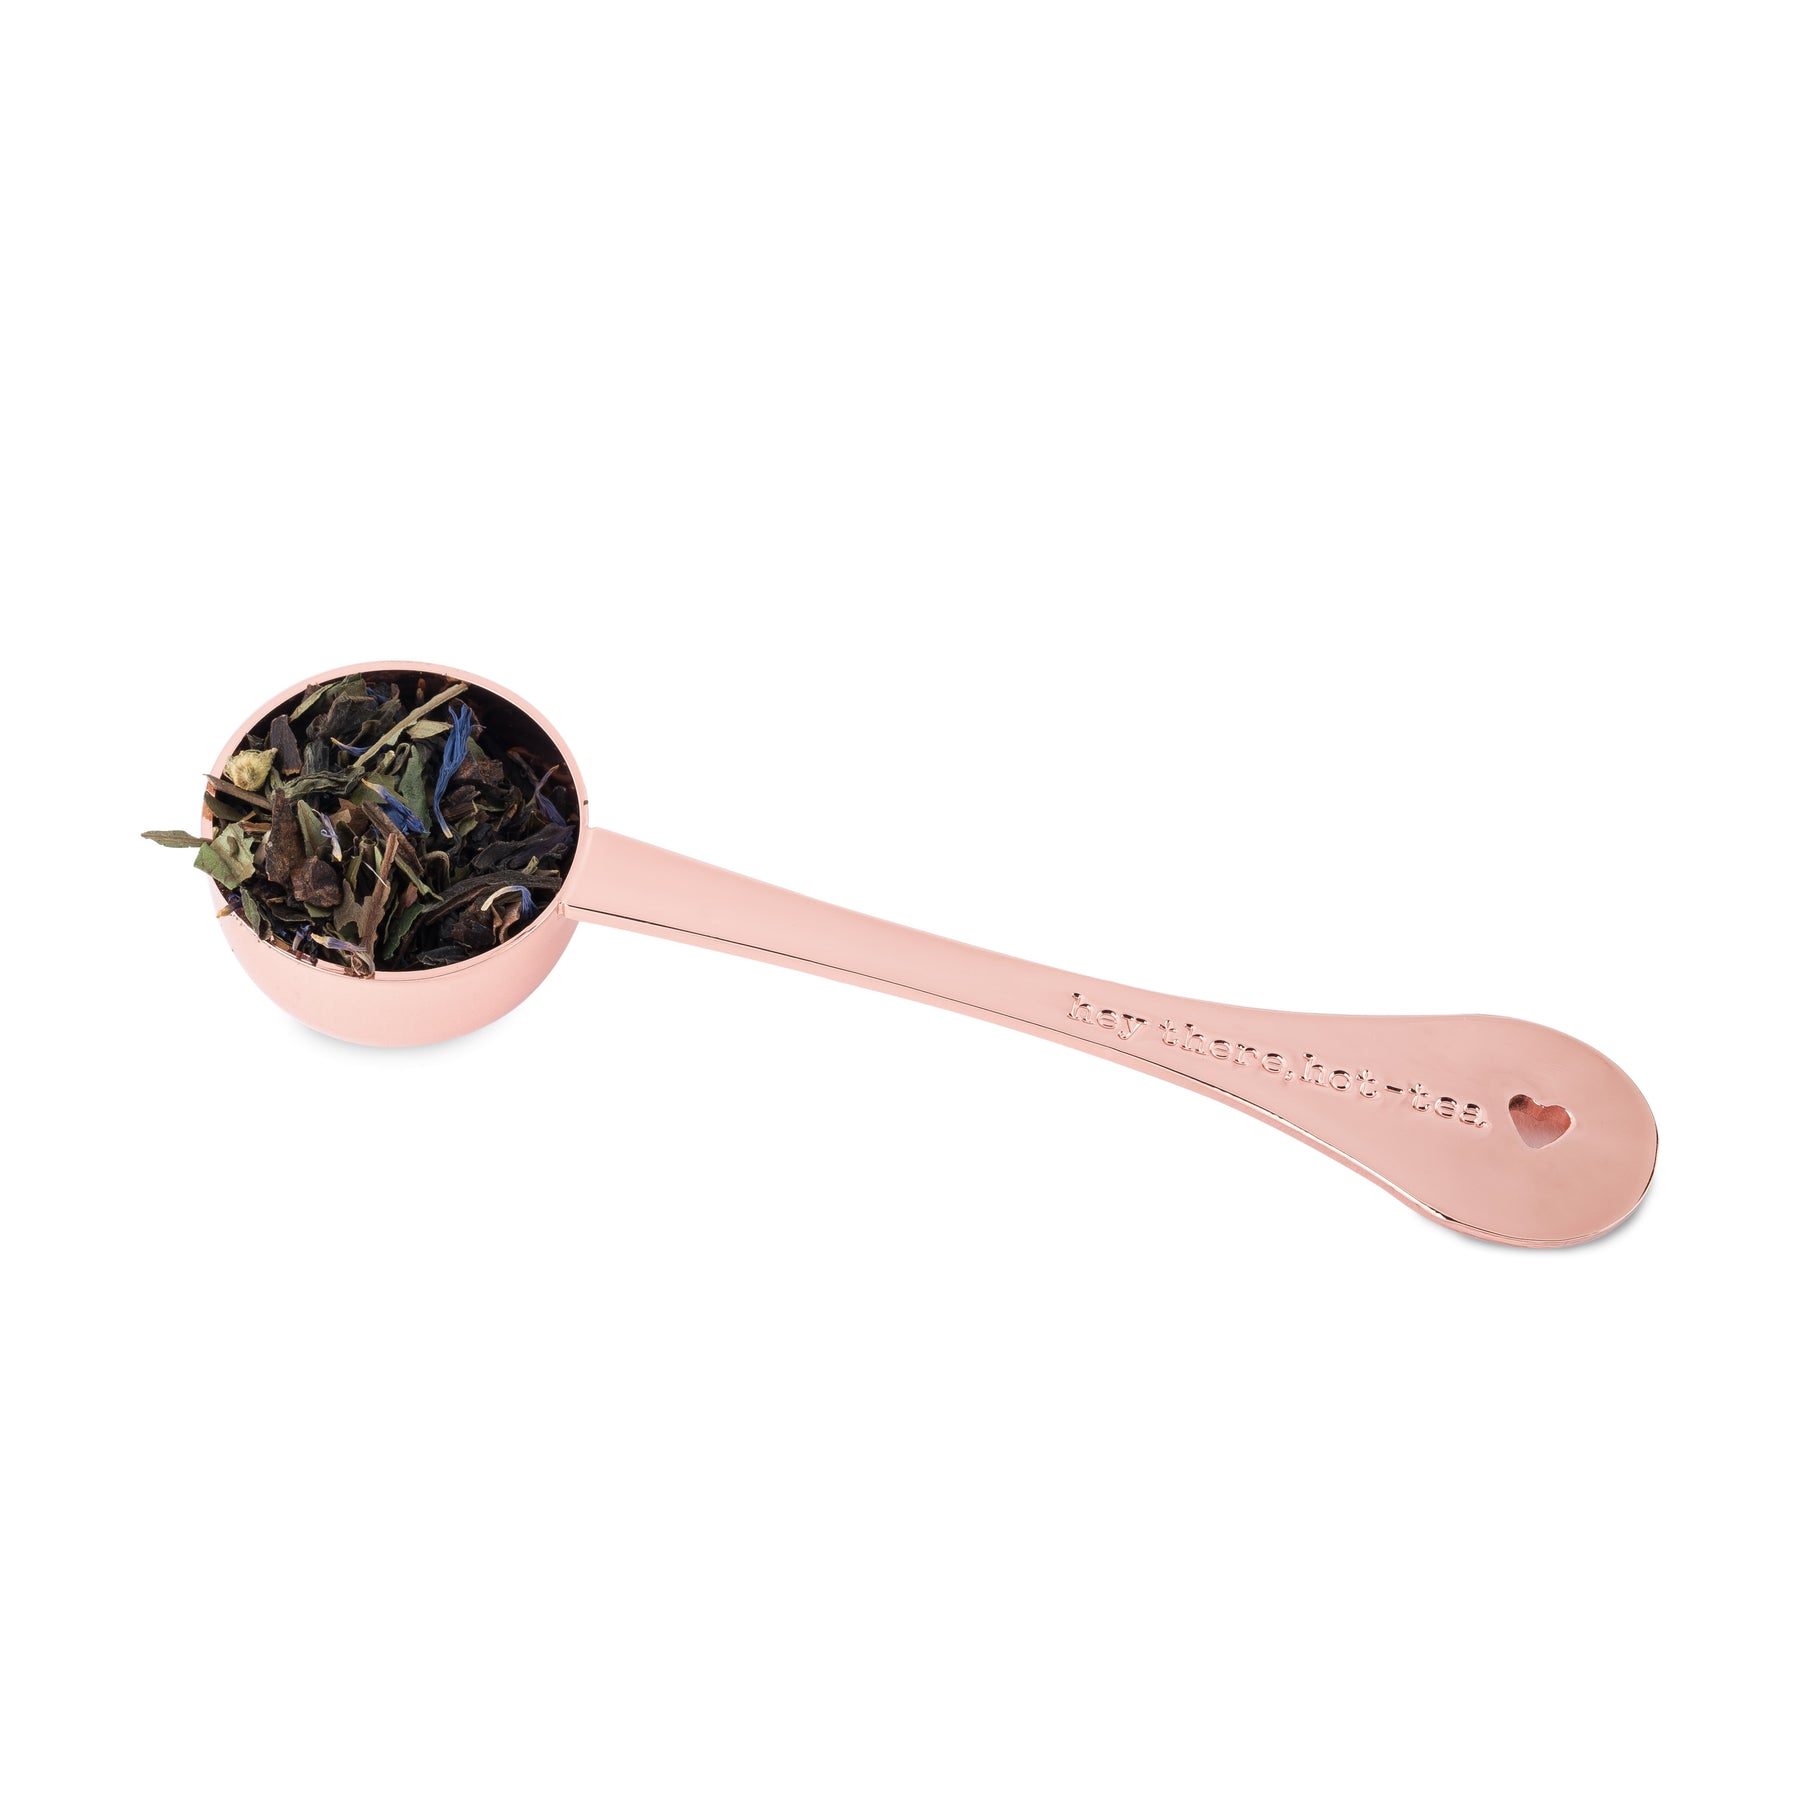 Apace Living Tea Scoop (Set of 3) - Stainless Steel Measuring Spoons for  Loose Leaf Tea, Coffee and More (L, Rose Gold)